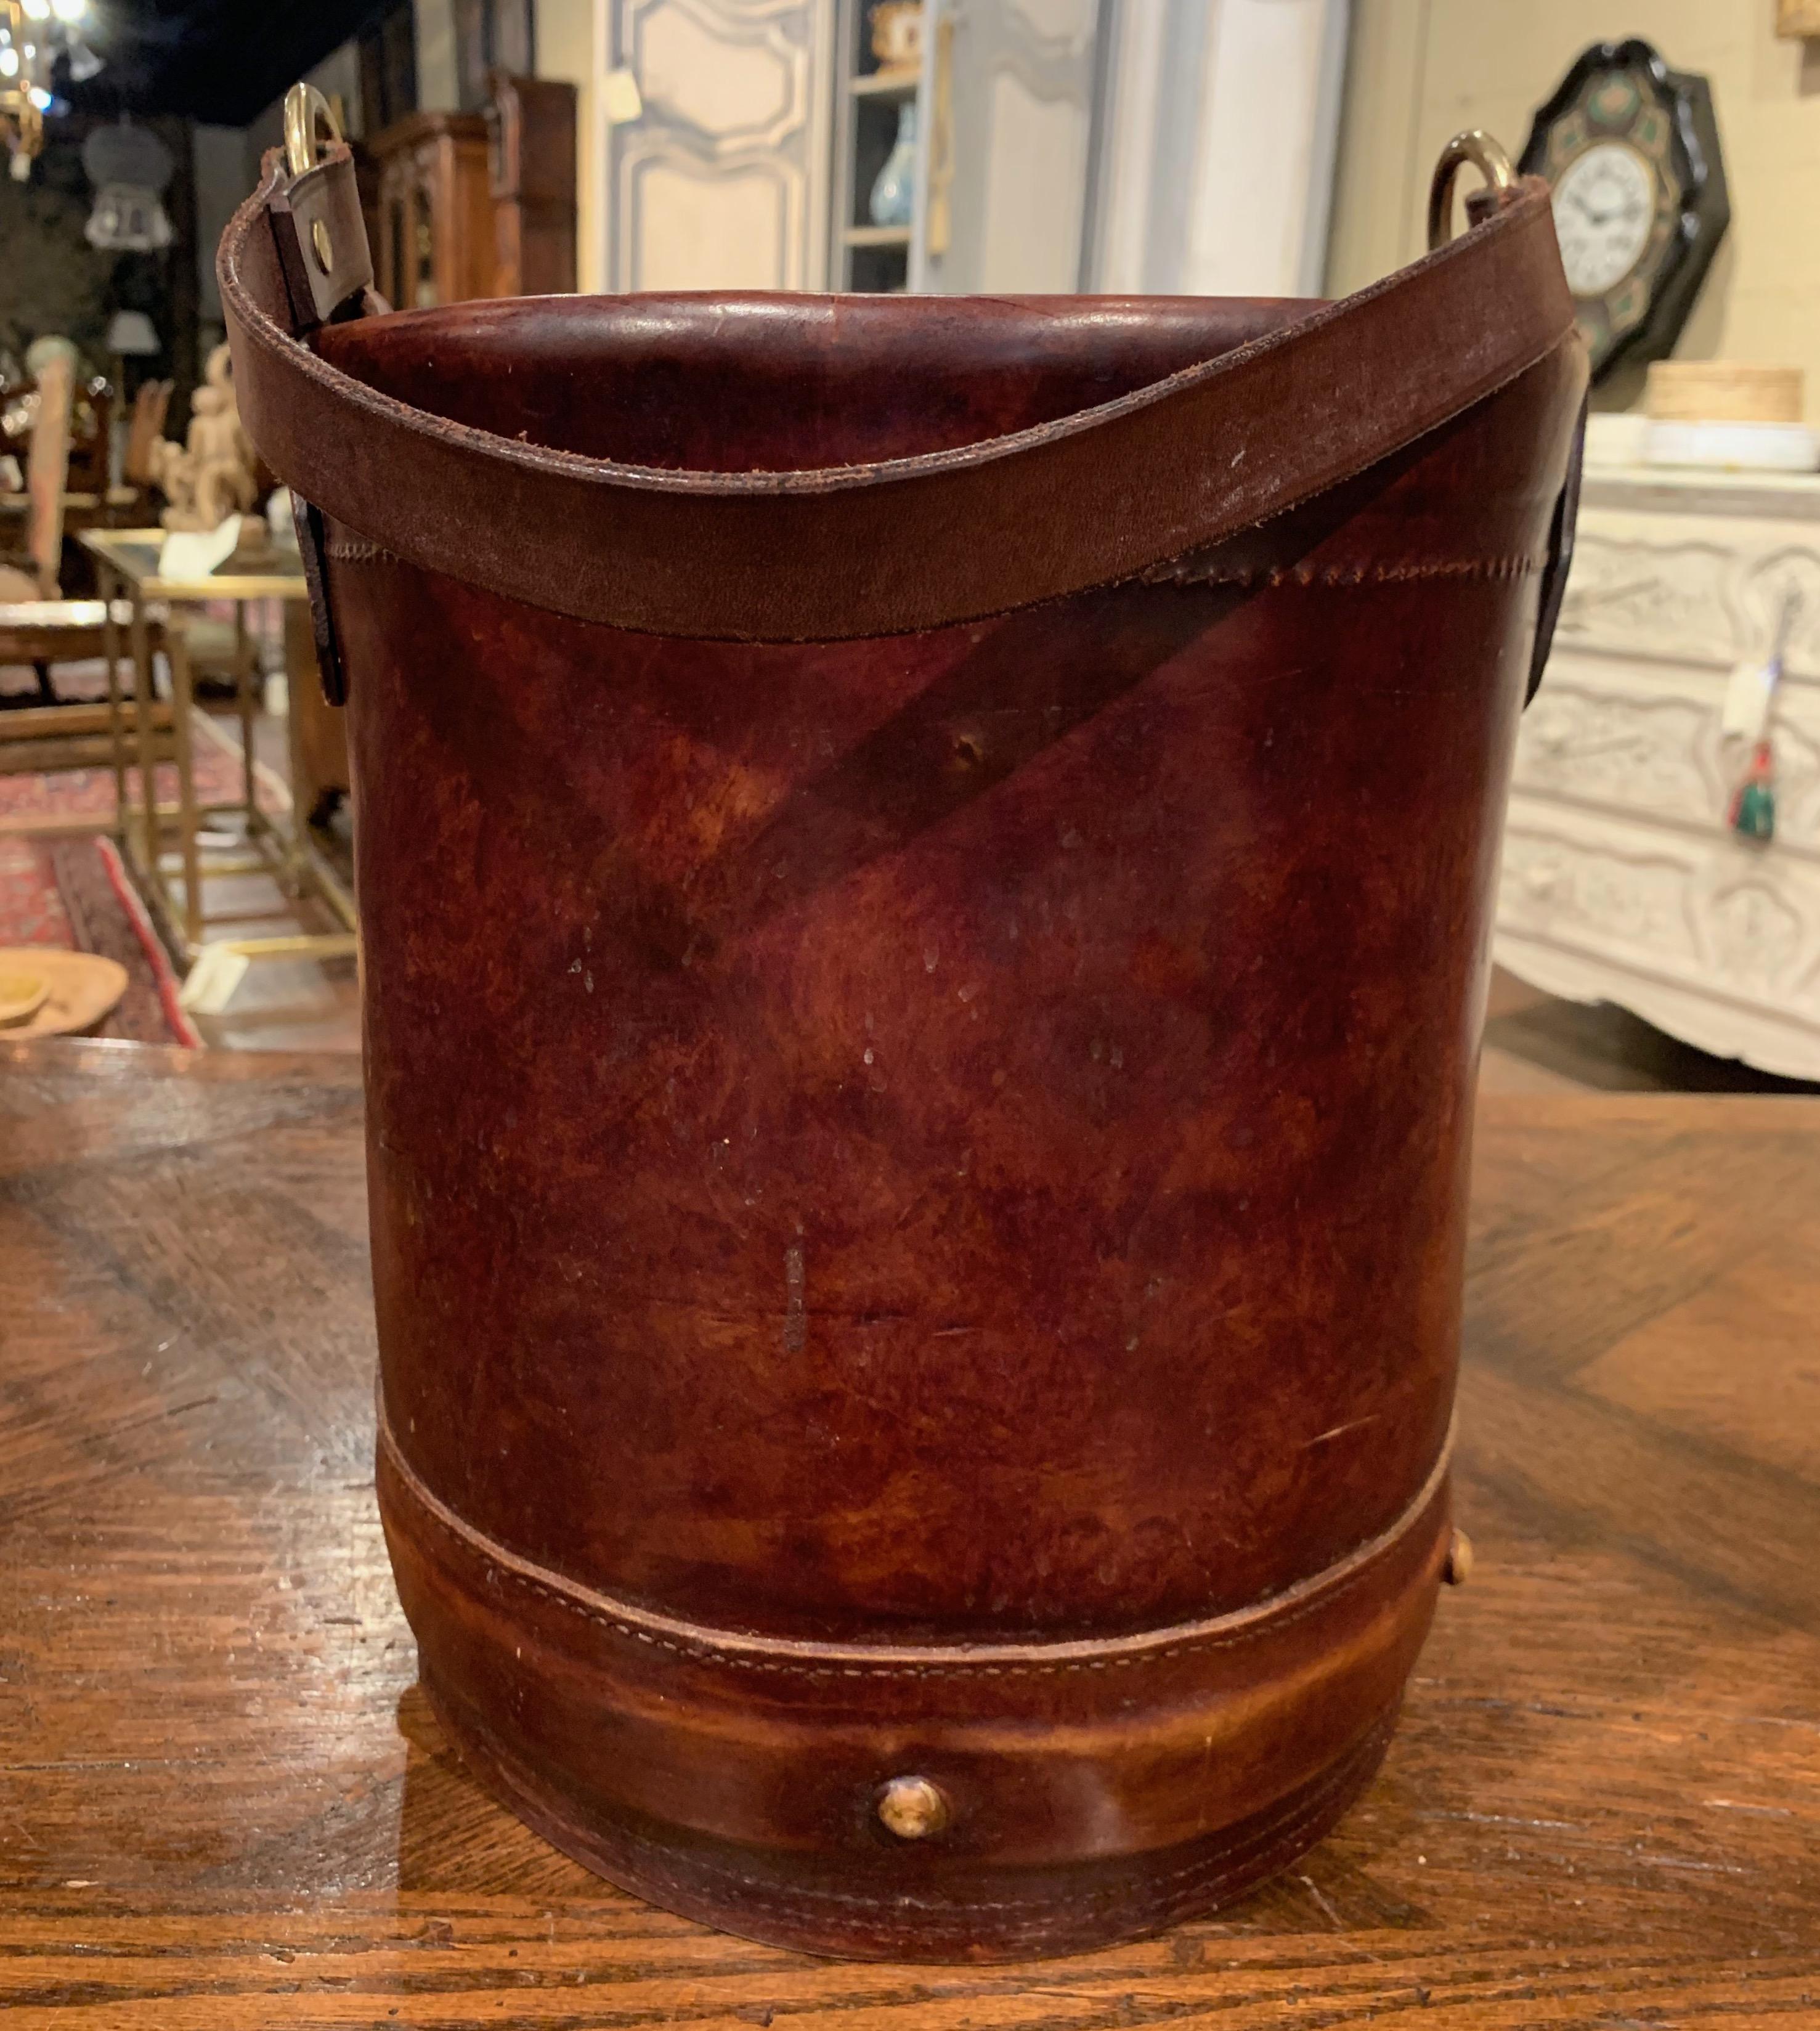 Crafted in France circa 1920, the antique decorative basket is round in shape and is embellished with a strap decorated with brass rings and brass nail heads around the base. The waste basket is in excellent condition with a rich patinated